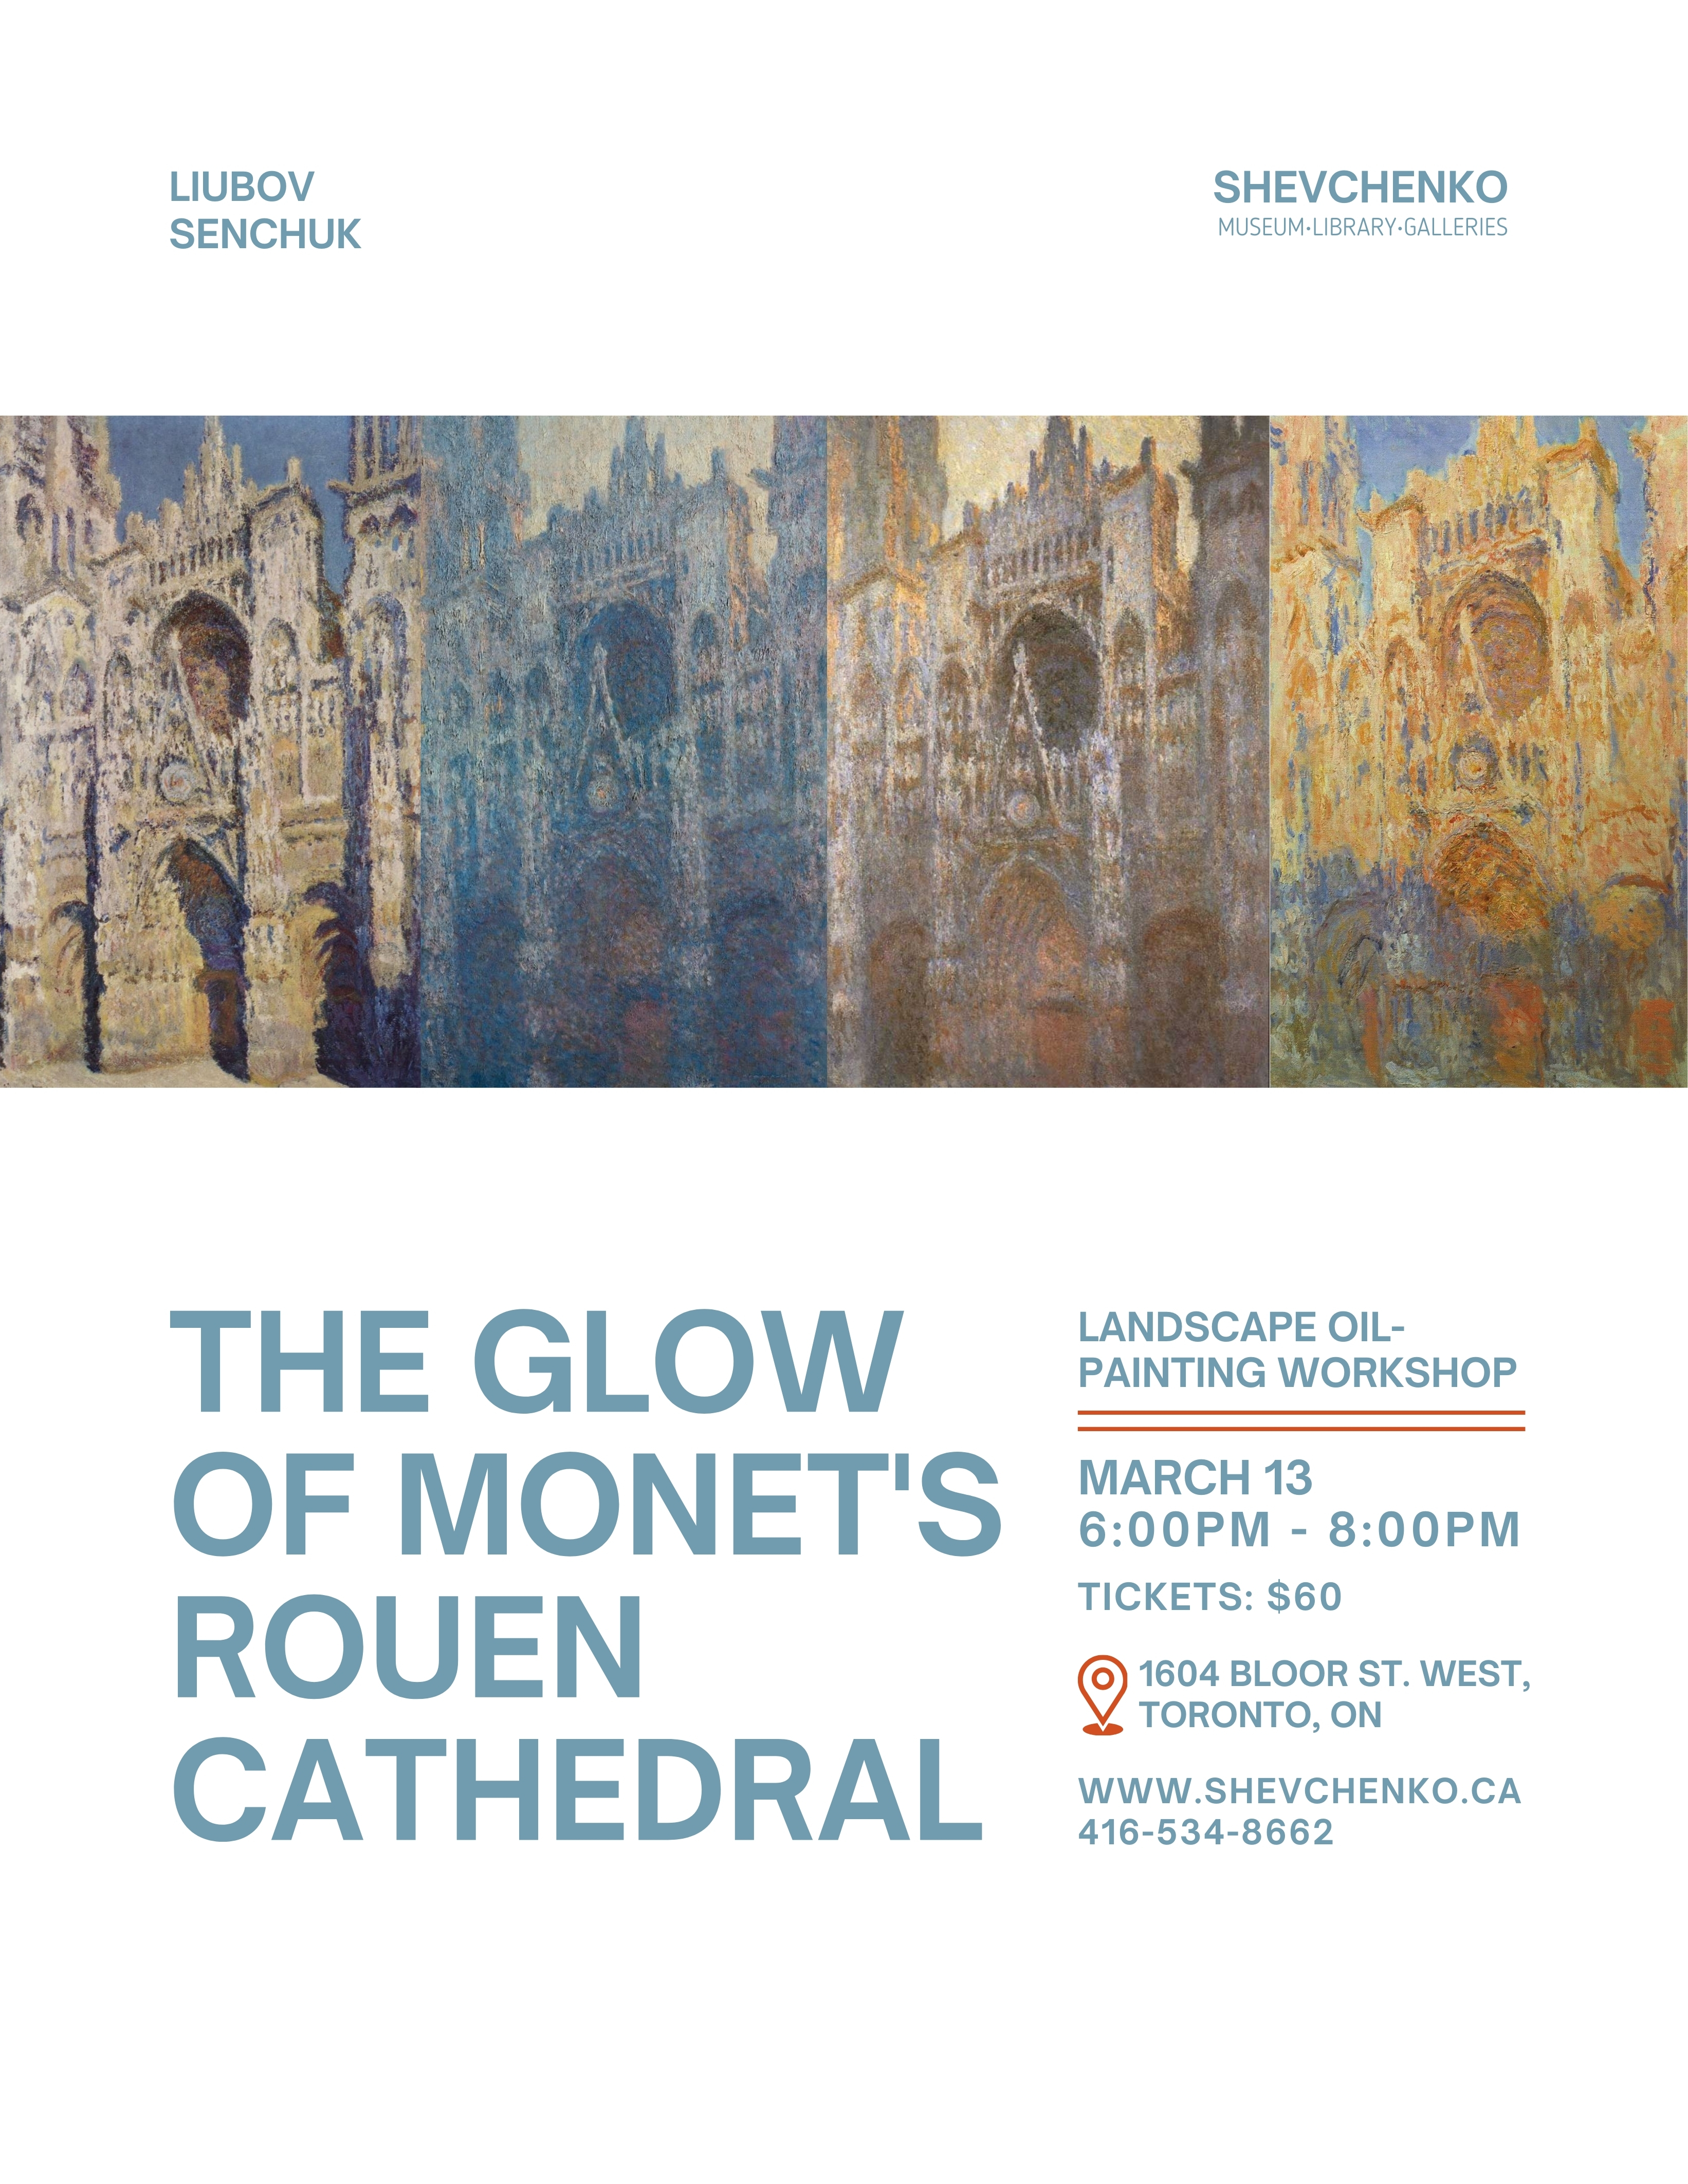 The Glow of Monet's Rouen Cathedral